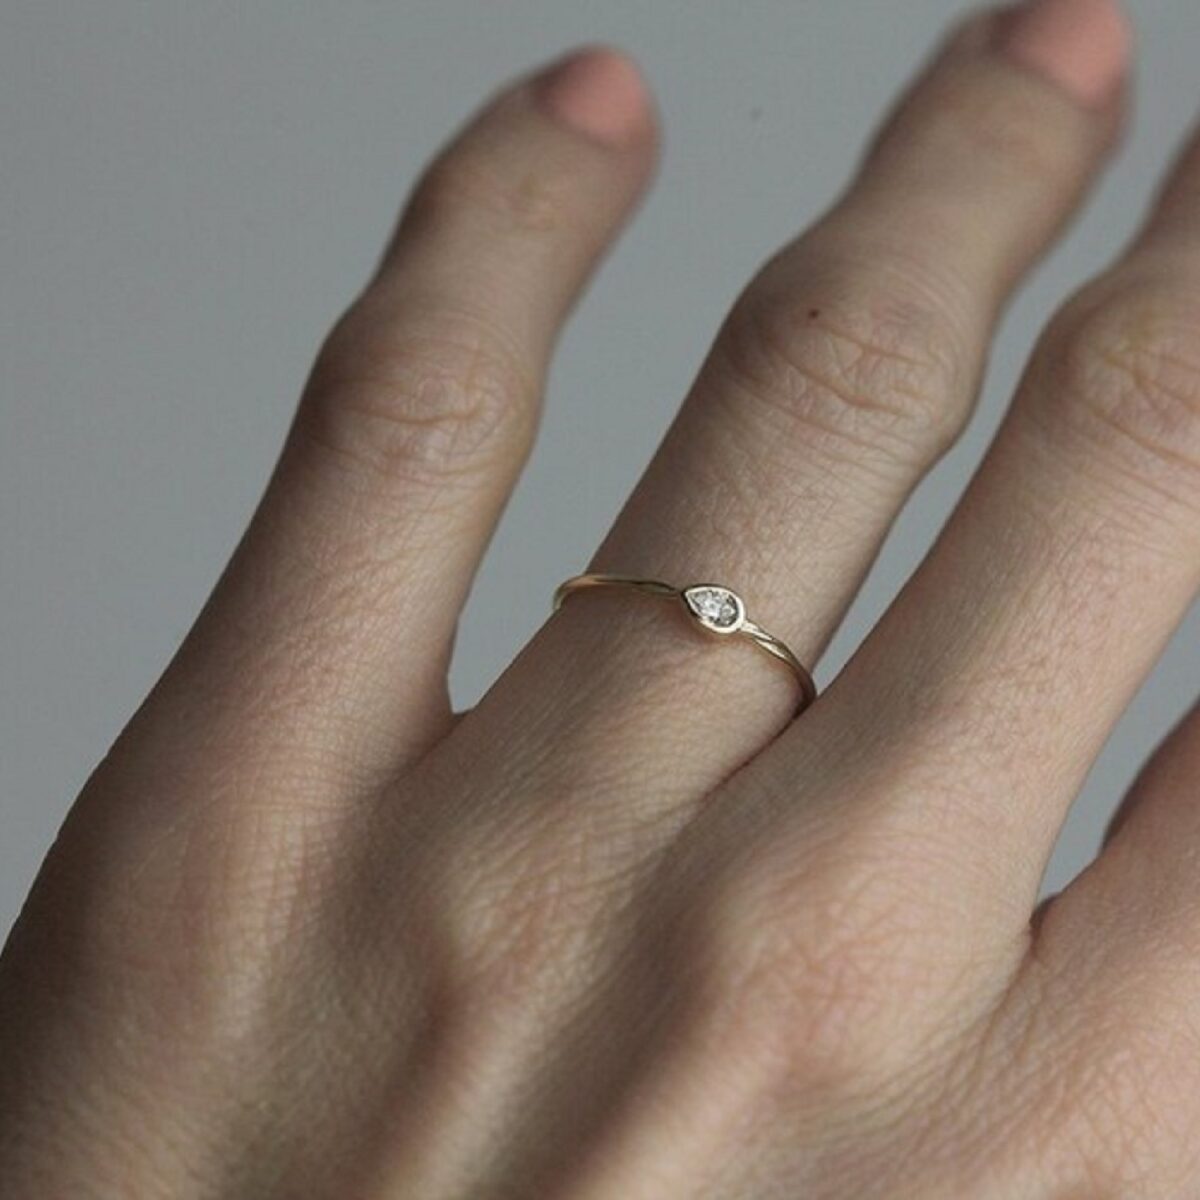 Minimal vintage style bezel set 3*2 mm pear cut lab grown diamond solitaire ring crafted in 14k yellow gold.